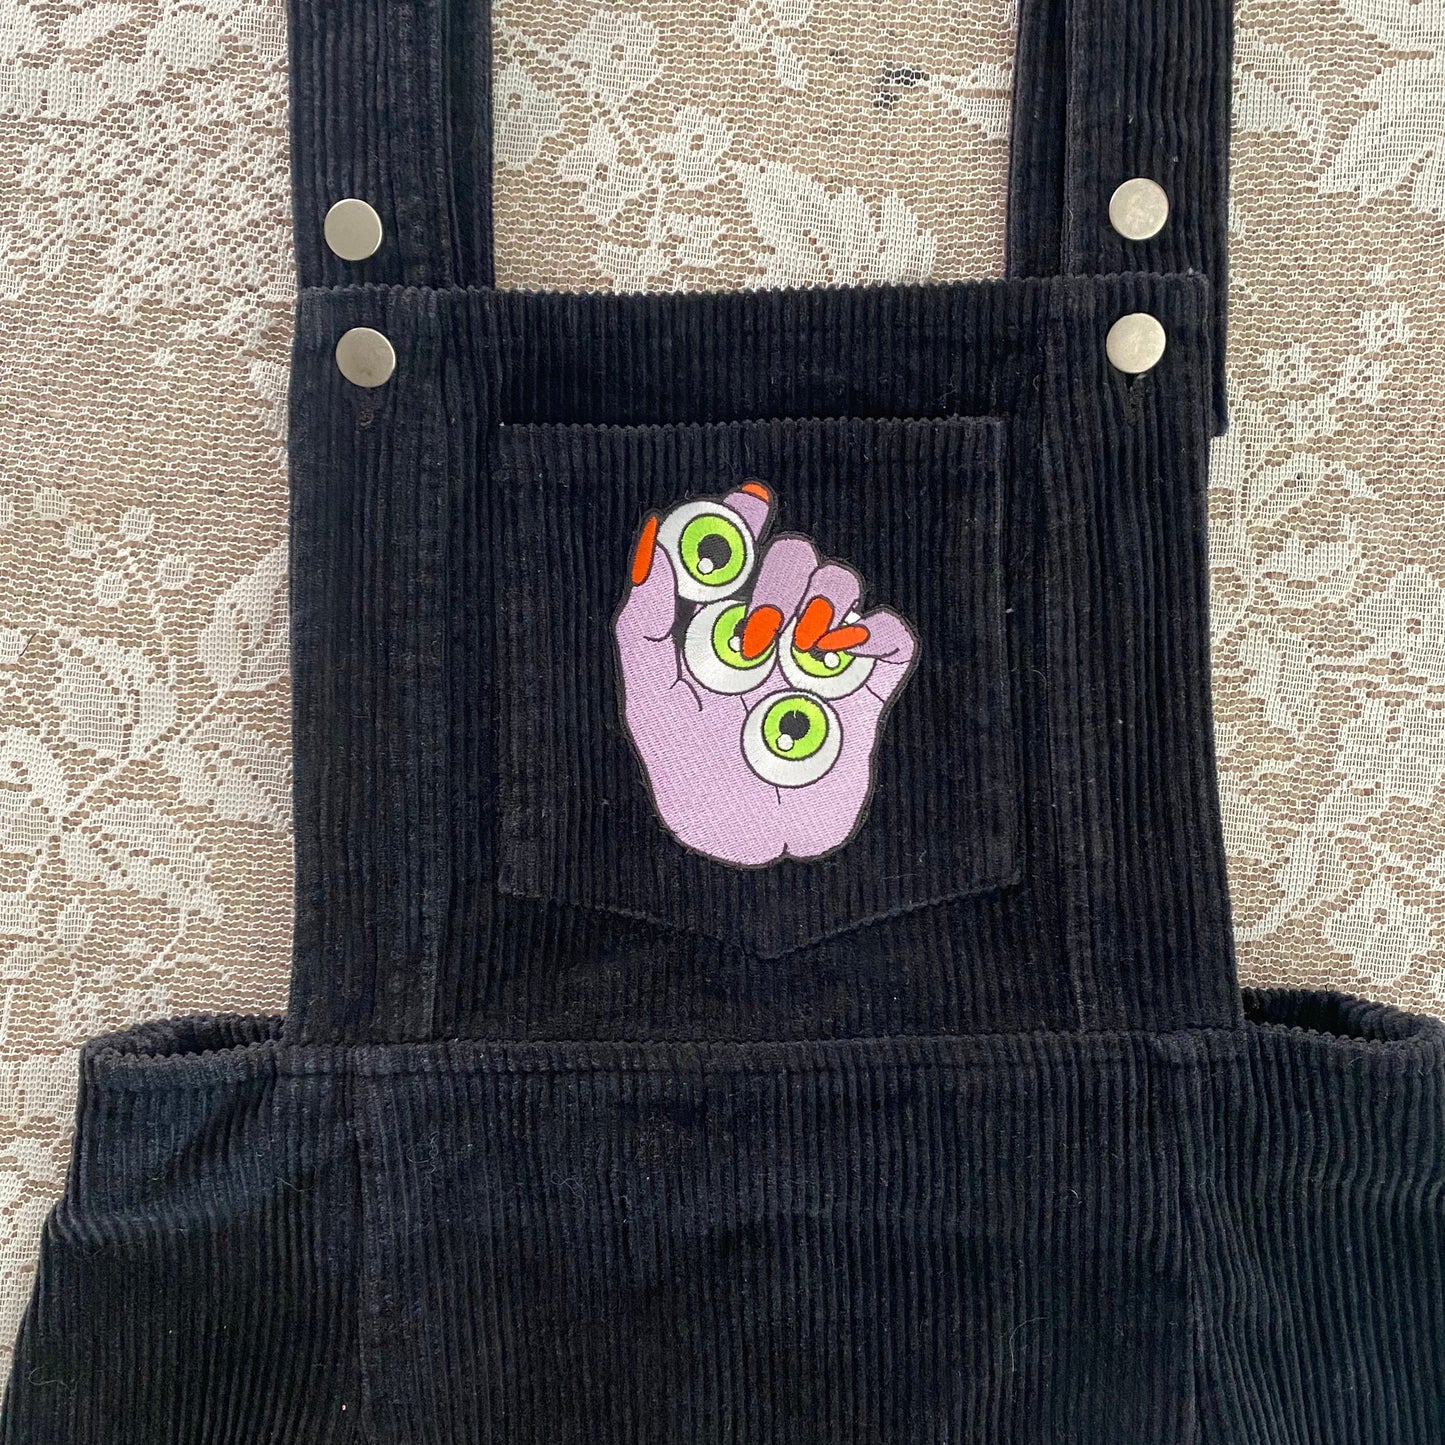 Patched Corduroy Overalls